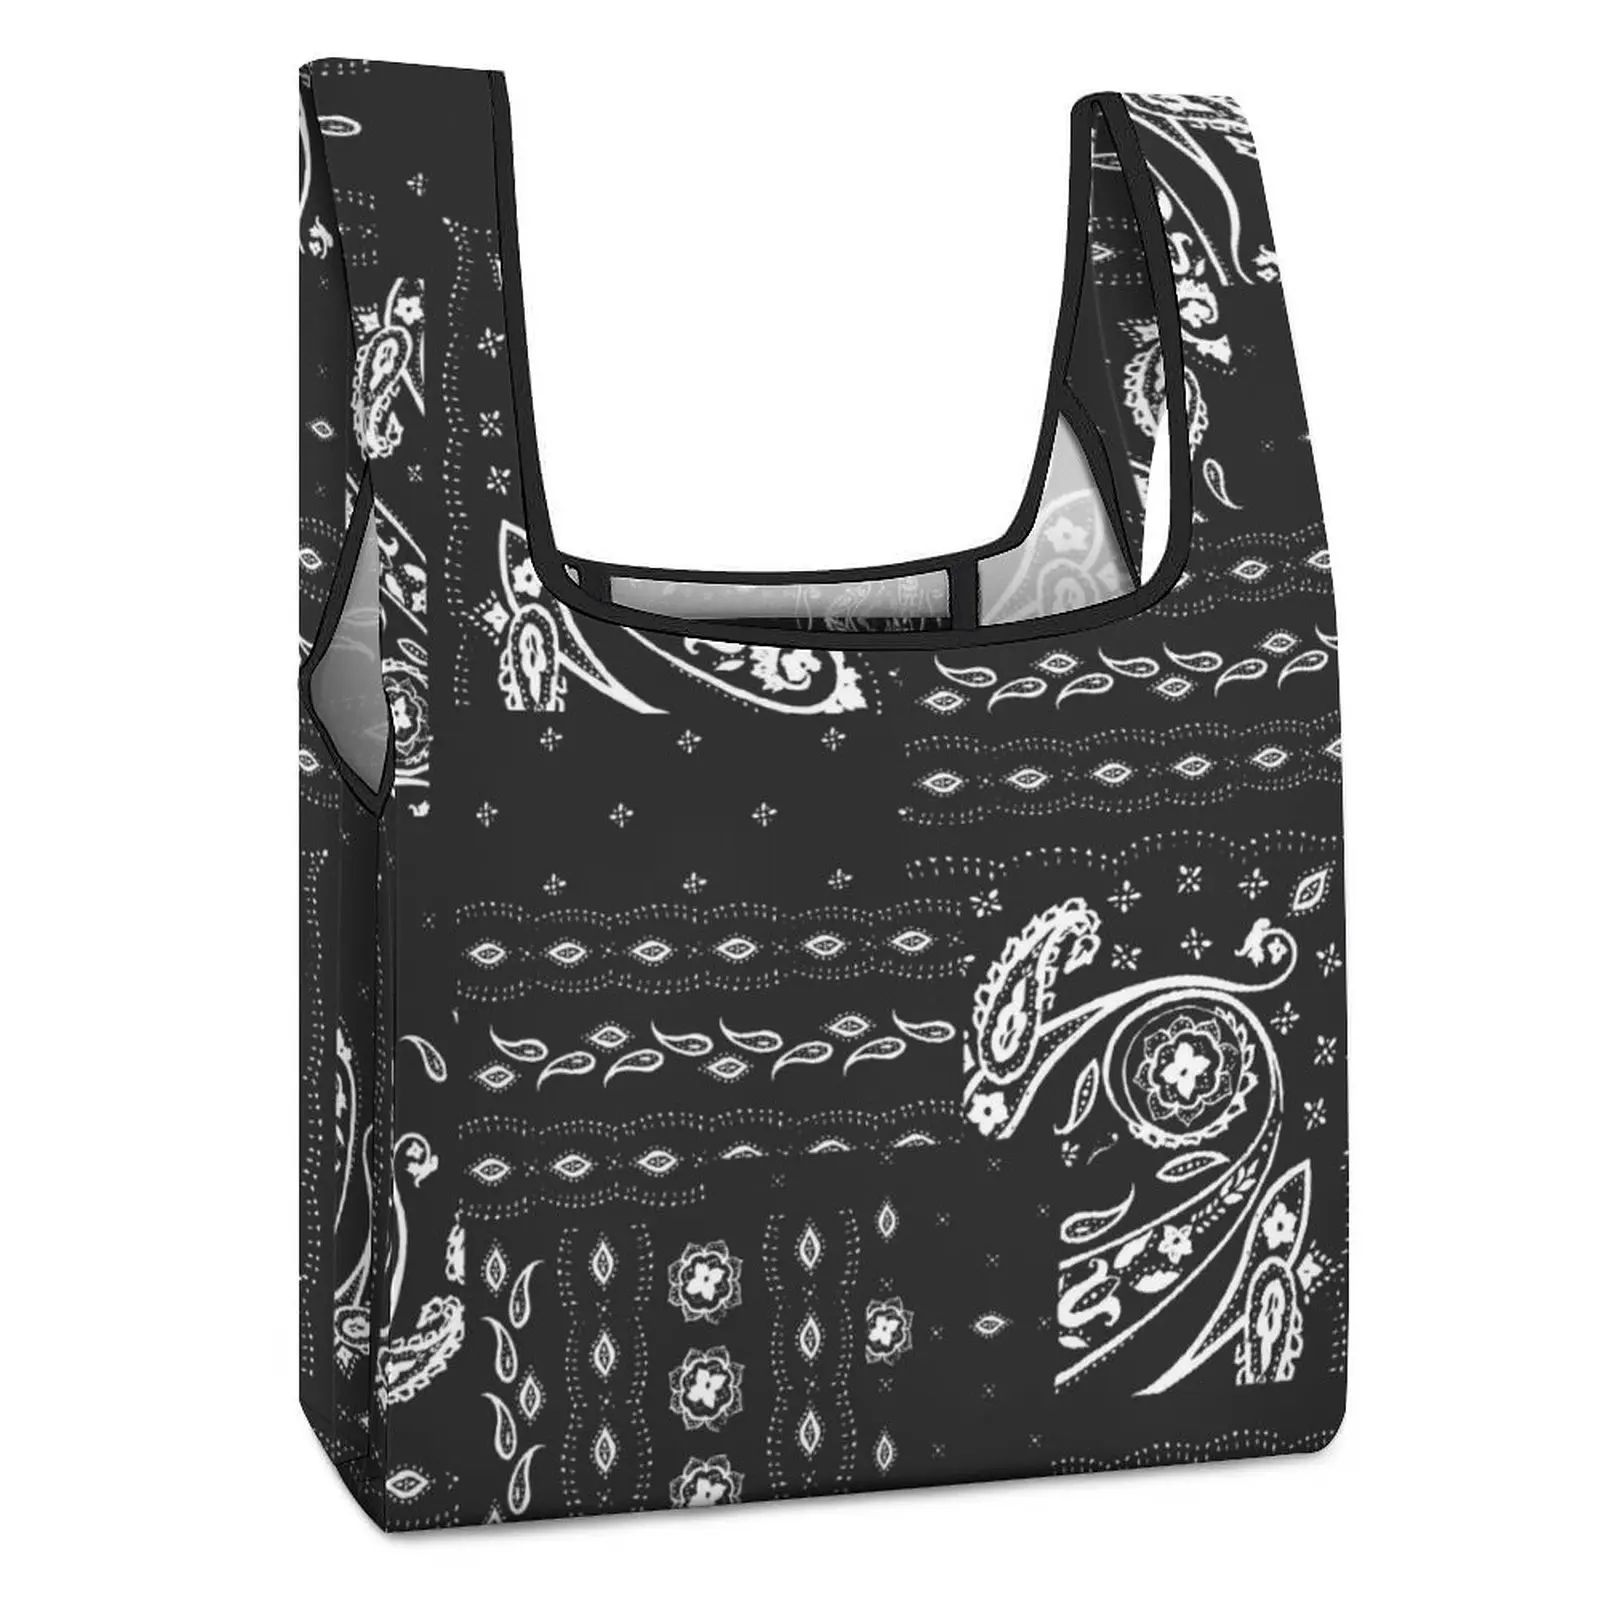 Customized Printed Shopping Bag Double Strap Handbag Black Unique Decor Tote Casual Woman Grocery Bag Custom Pattern